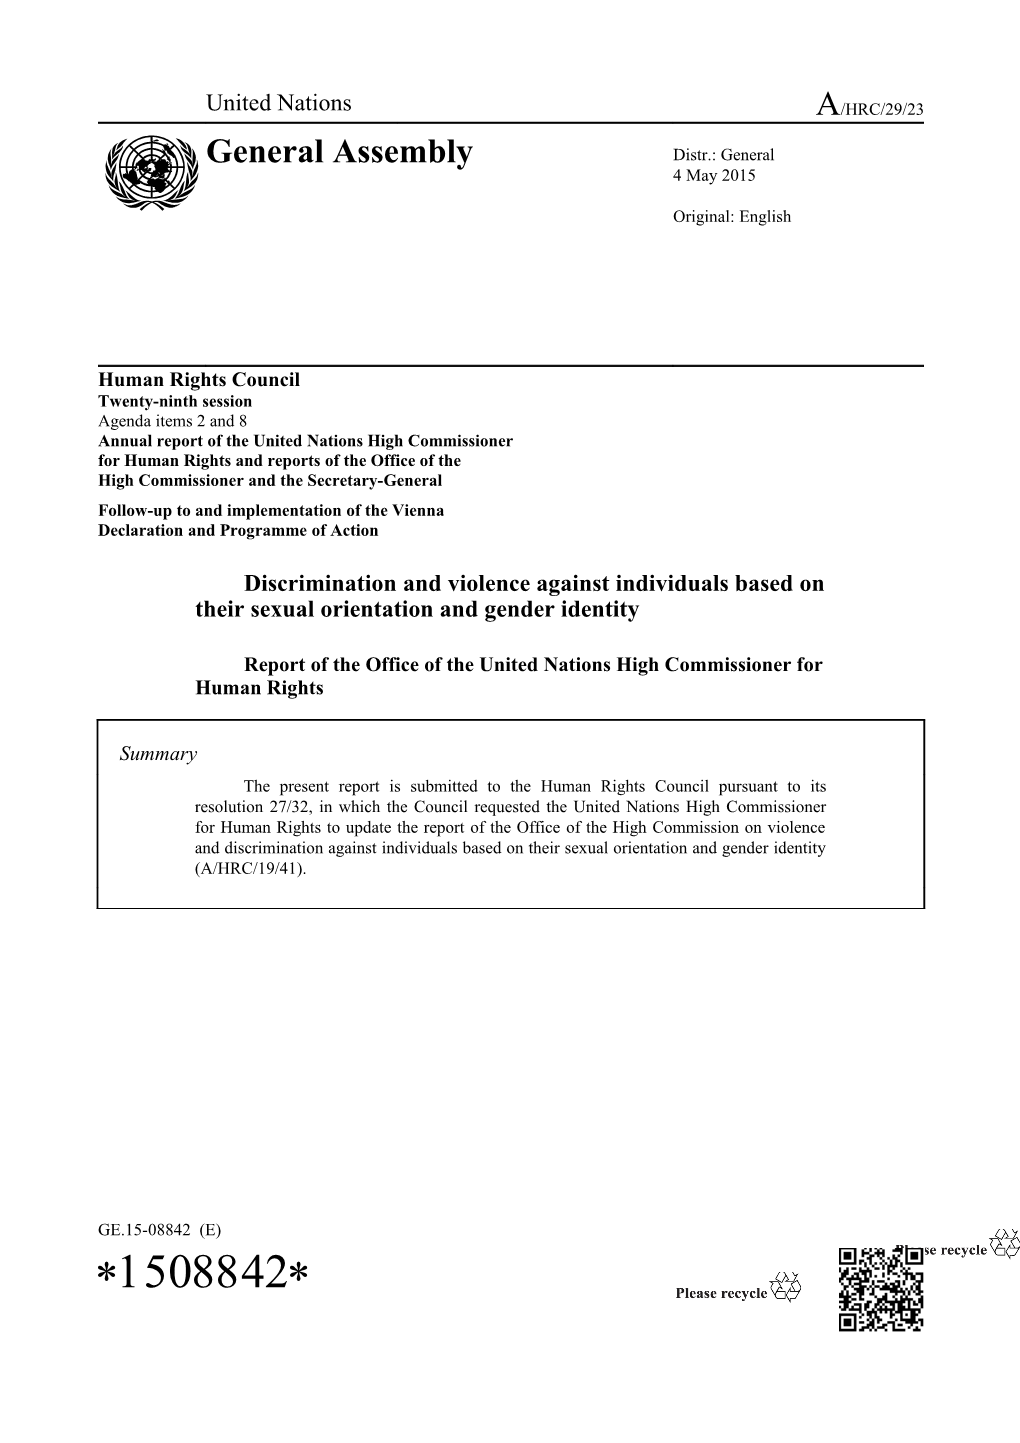 Update of Report A/HRC/19/41 (On Discriminatory Laws and Practices and Acts of Violence